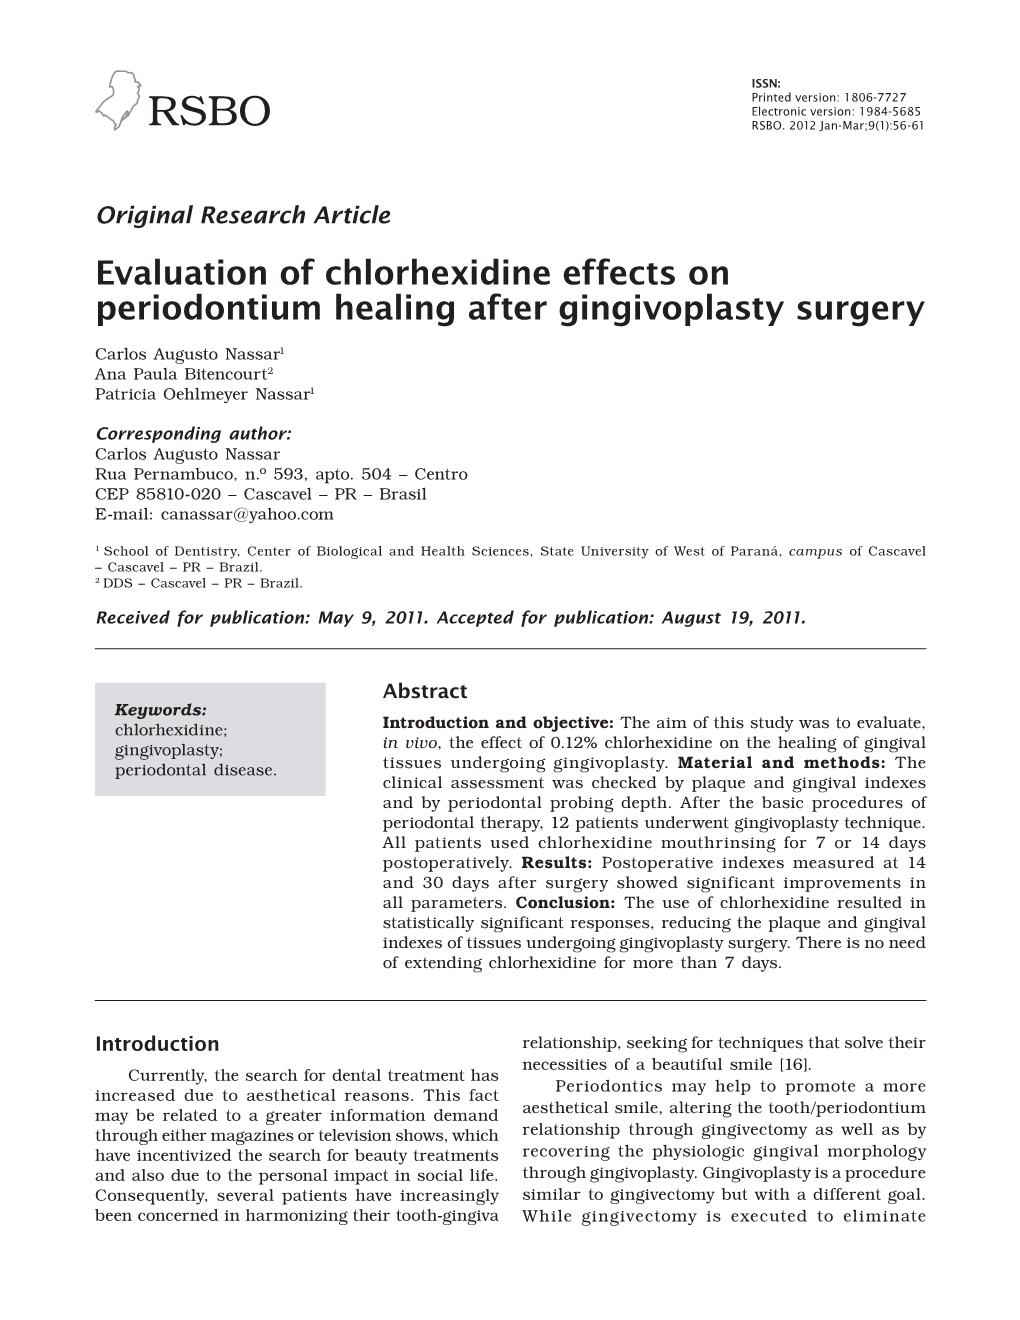 Evaluation of Chlorhexidine Effects on Periodontium Healing After Gingivoplasty Surgery